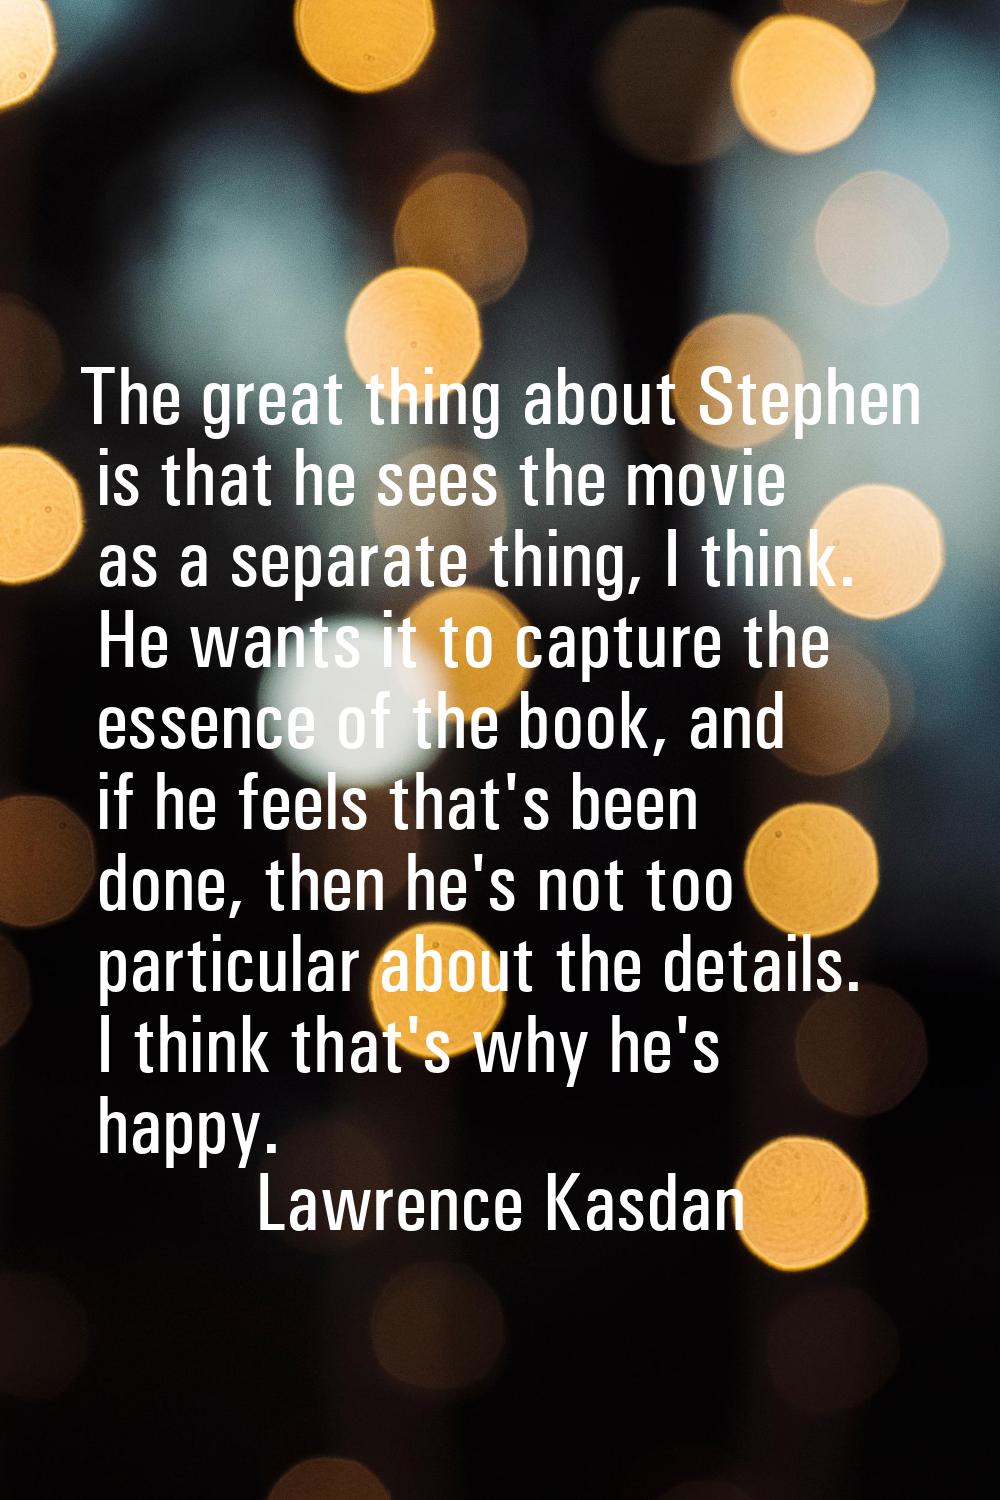 The great thing about Stephen is that he sees the movie as a separate thing, I think. He wants it t